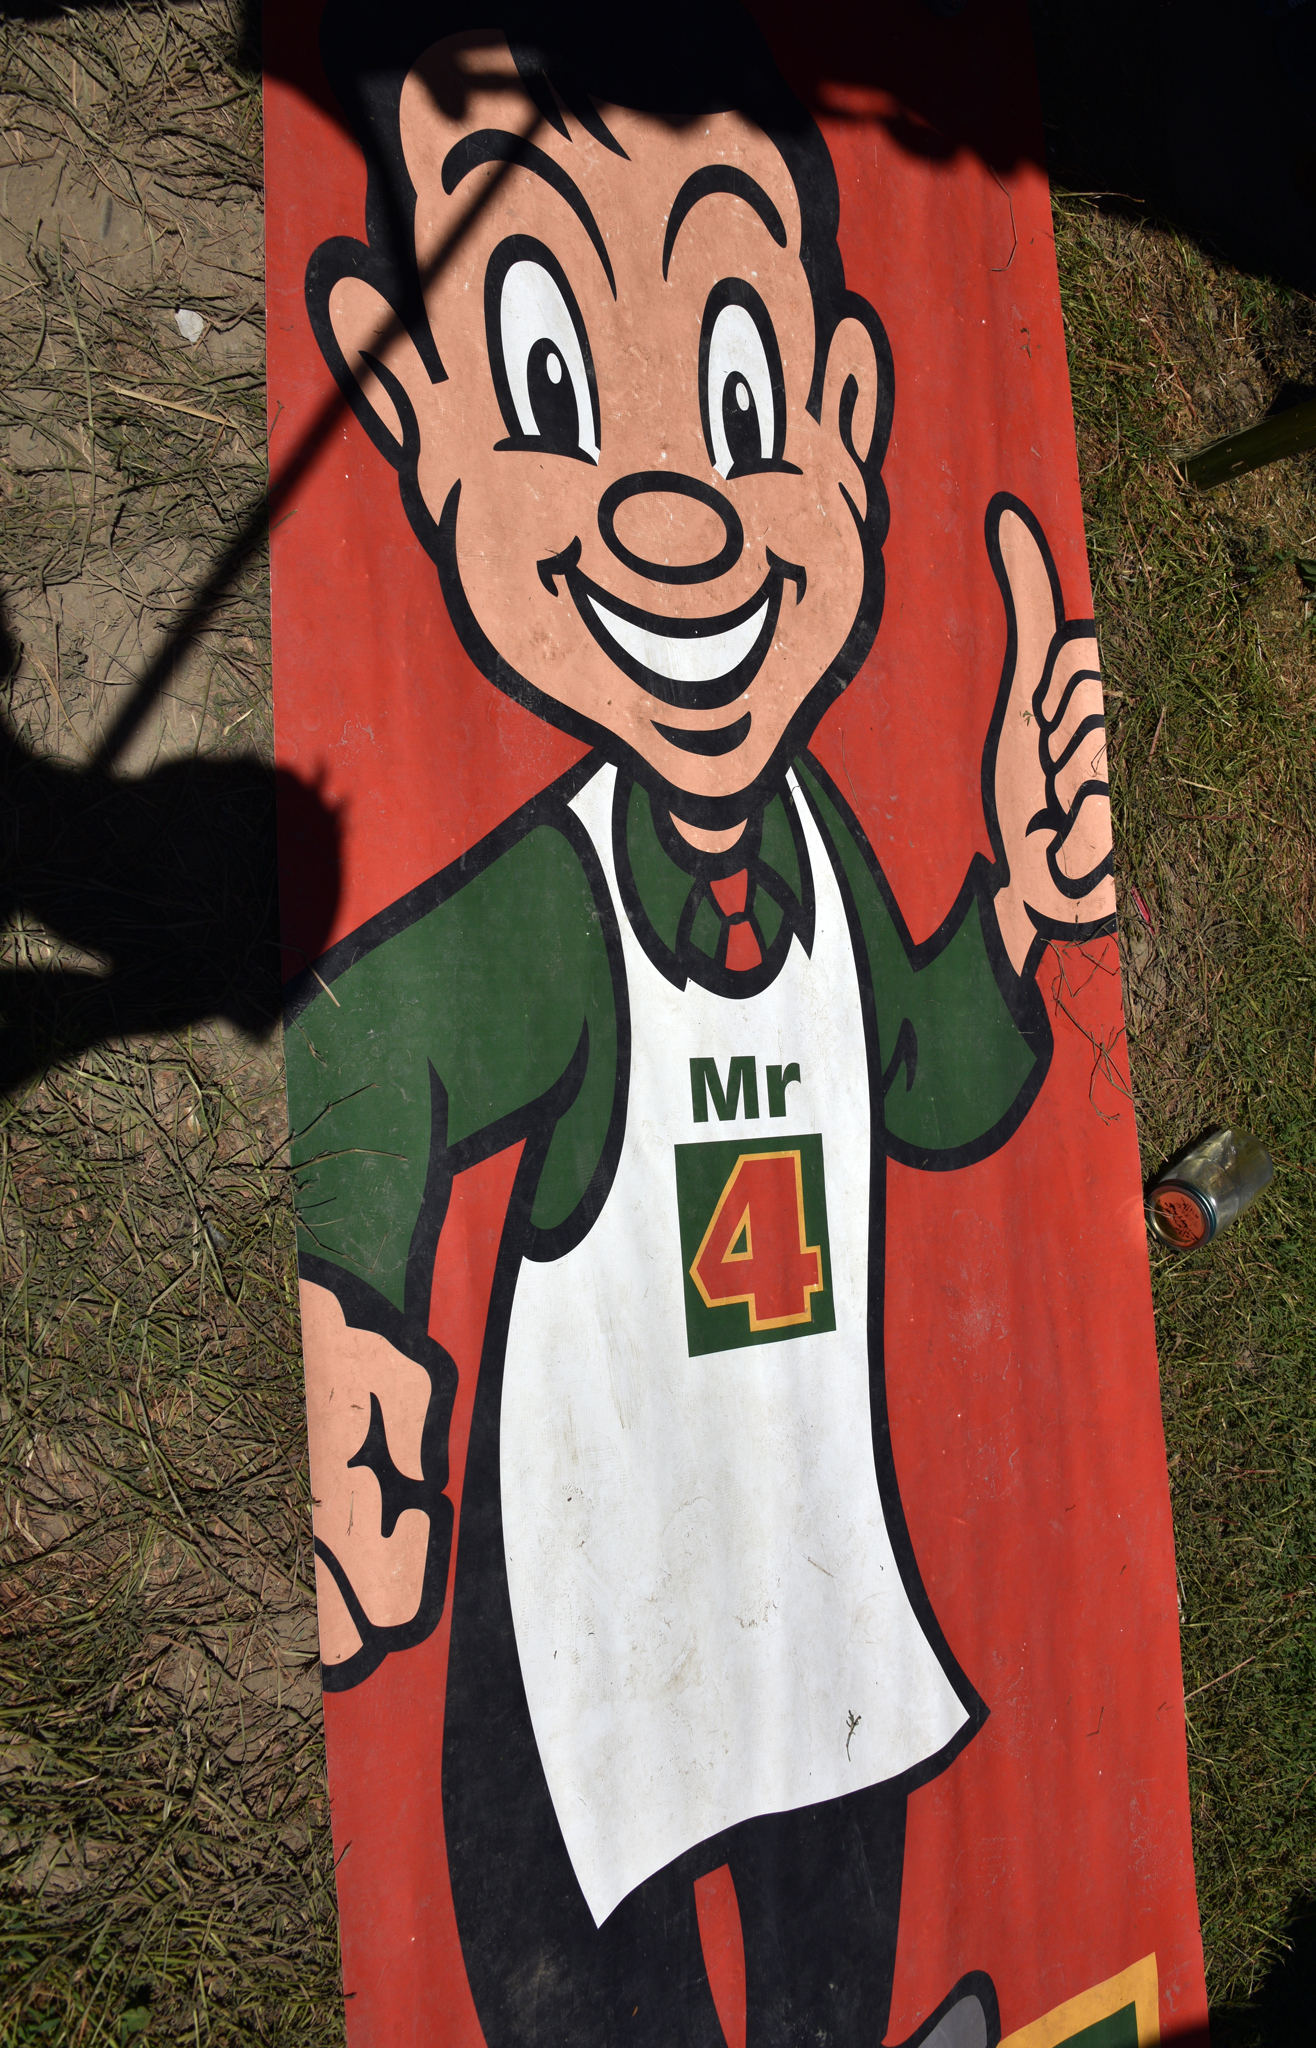 A flag of a cartoon man wearing a white apron with 'mr 4' written on it, giving the thumbs up